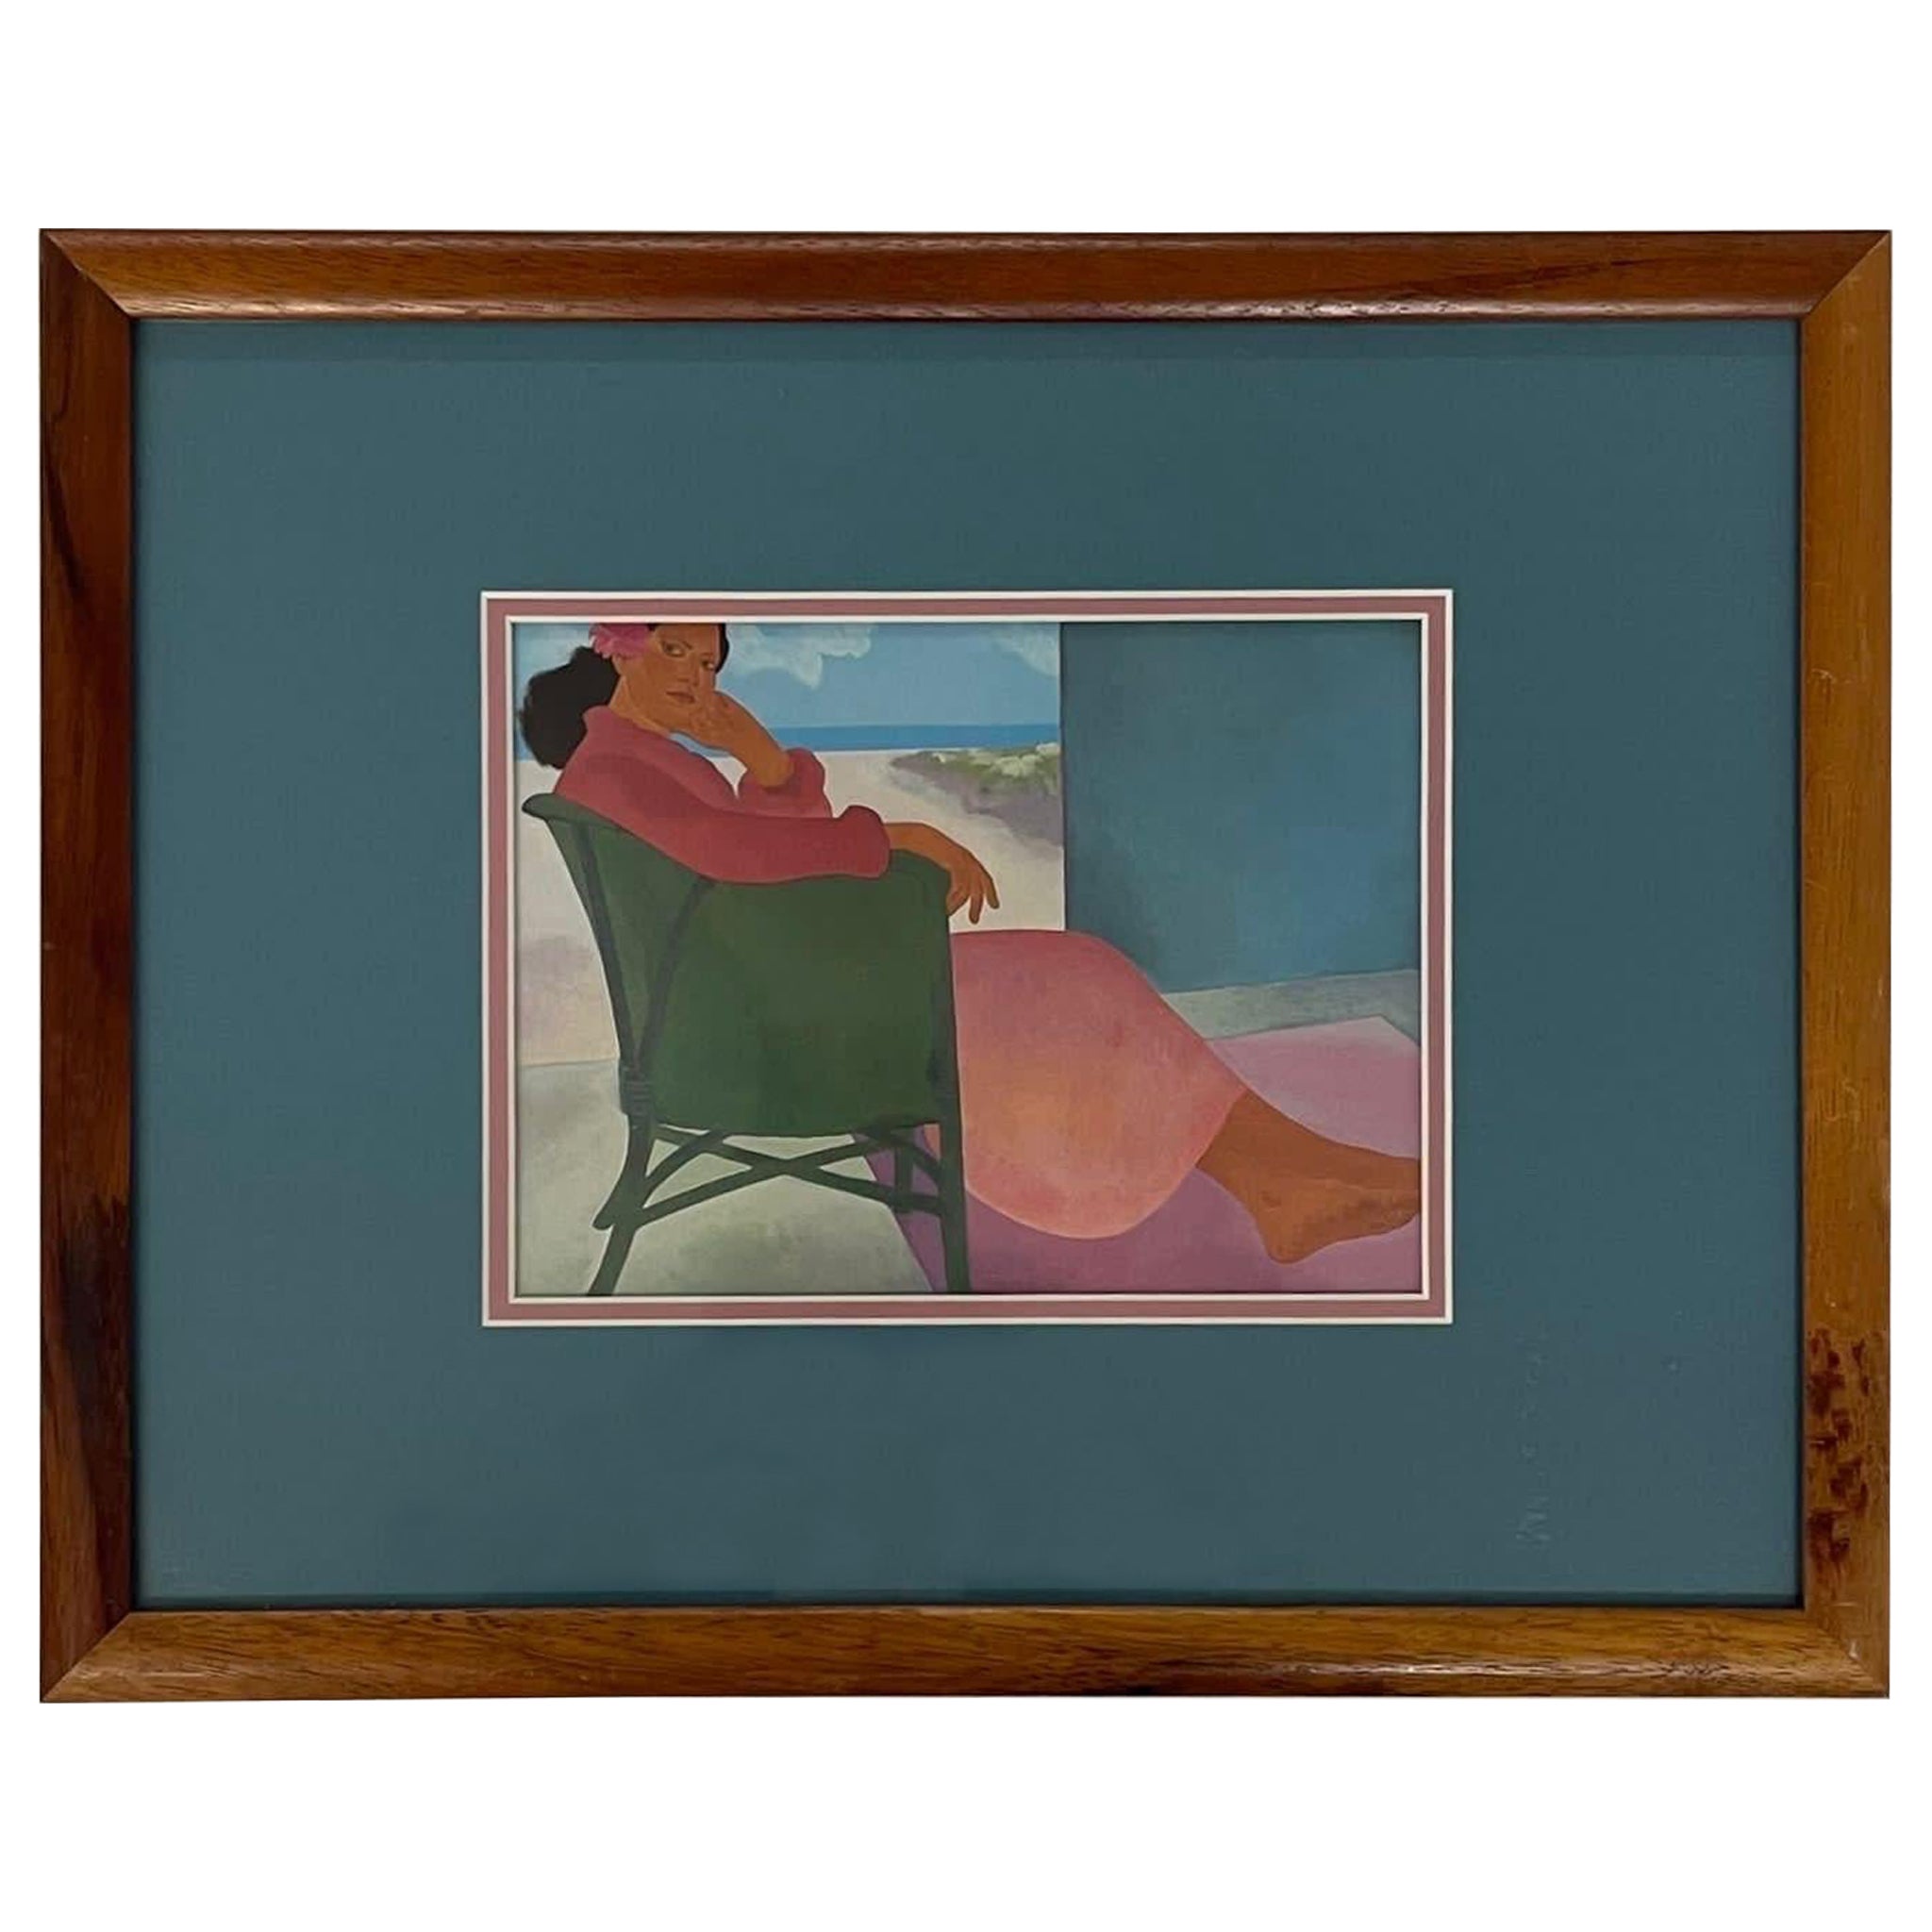 Vintage Wood Framed and Matted Print Titled “ Woman in Chair “ by Peggy Hopper. For Sale